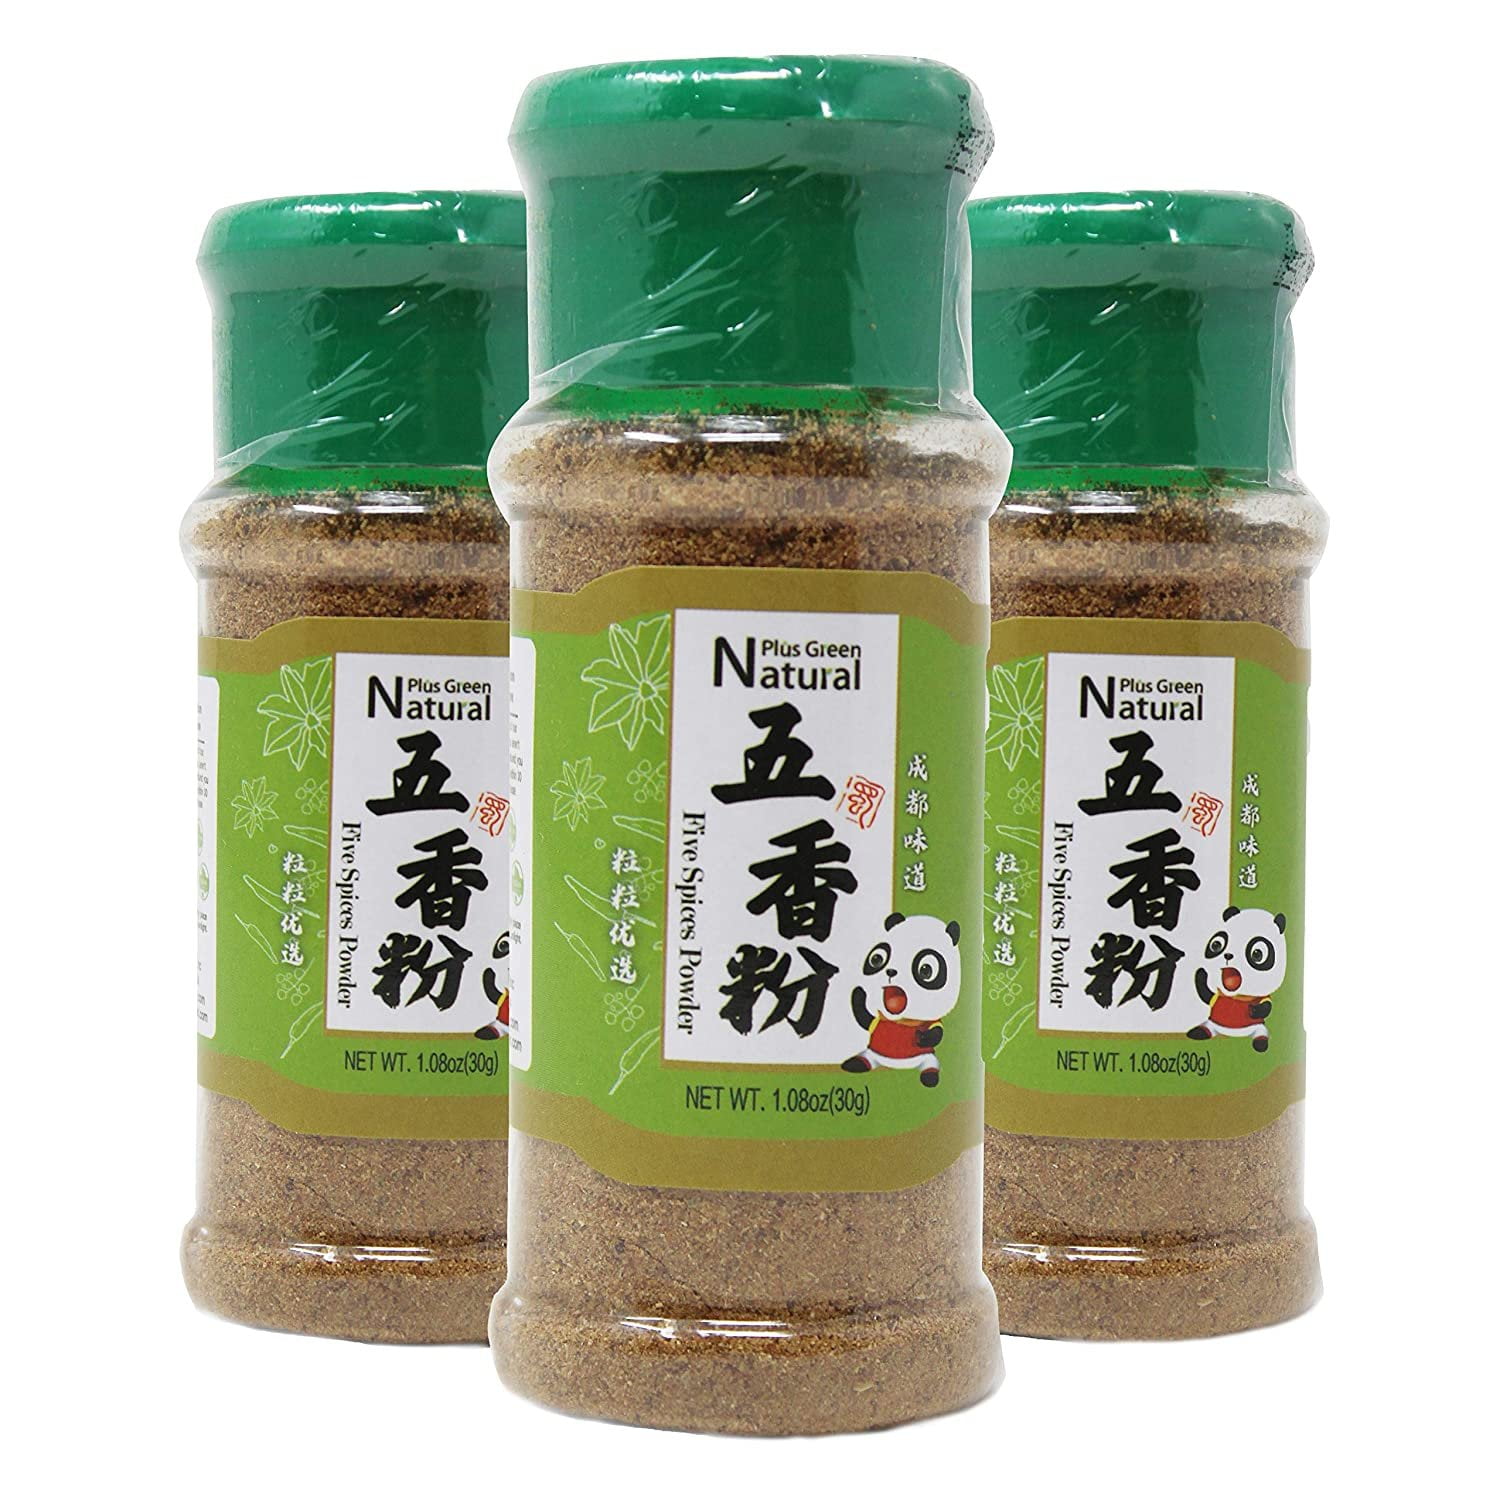 Authentic Chinese Five Spice Blend 1.05 oz, Gluten Free, All Natural Ground Chinese  5 Spice Powder, No Preservatives No MSG, Mixed Spice Seasoning for Asian  Cuisine & Stir Fry 3 Pack 